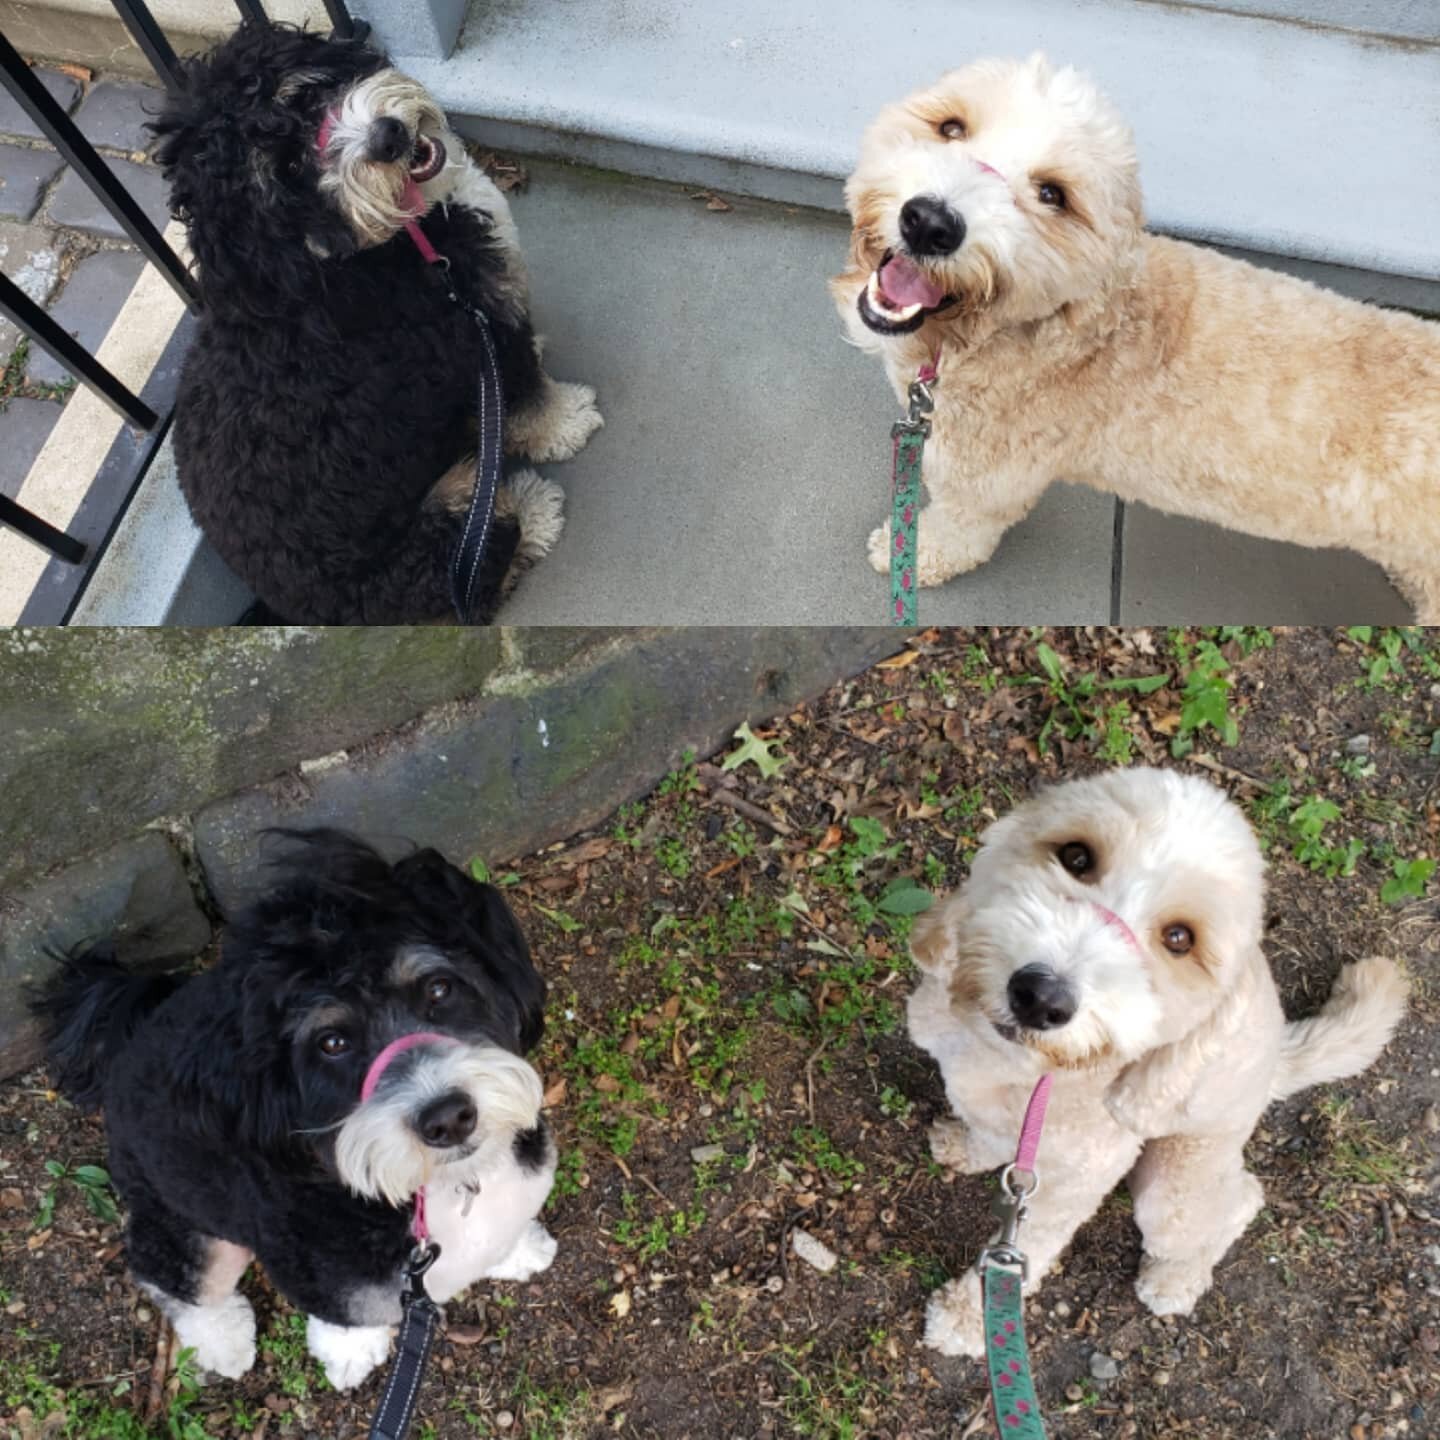 Molly and Adeline got themselves a makeover- like new pups!!🤣🐶❤
#lovethesedogs #joyfuldogs #responsiblewalkers #professionalpetcare #downtownjerseycity #jerseycitypets #dogsofjc #dogsofjerseycity @dogsofhamiltonparkjc #downtownjc #doodle #bernadood